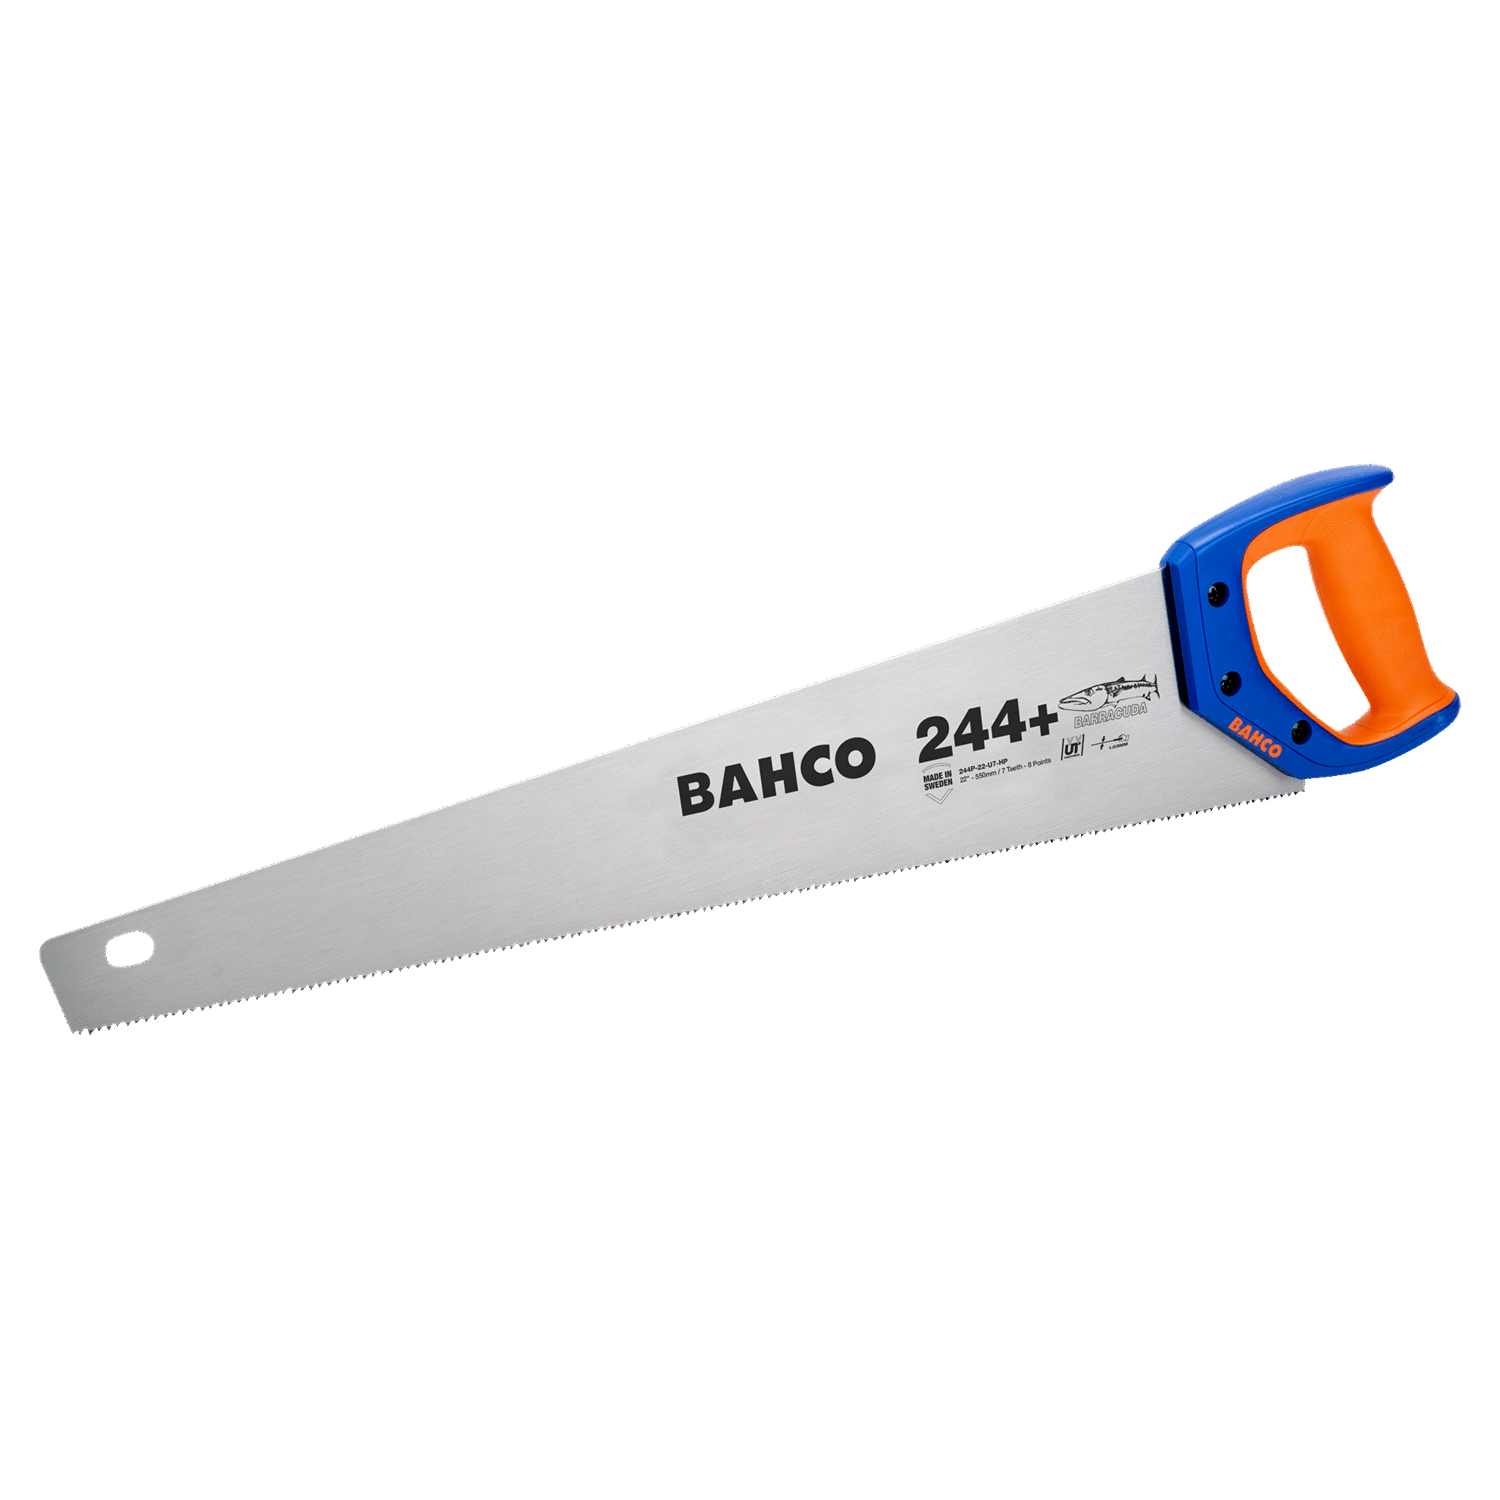 BAHCO 244P Handsaw with Dual-Component - 7"/8" - Premium Handsaw from BAHCO - Shop now at Yew Aik.